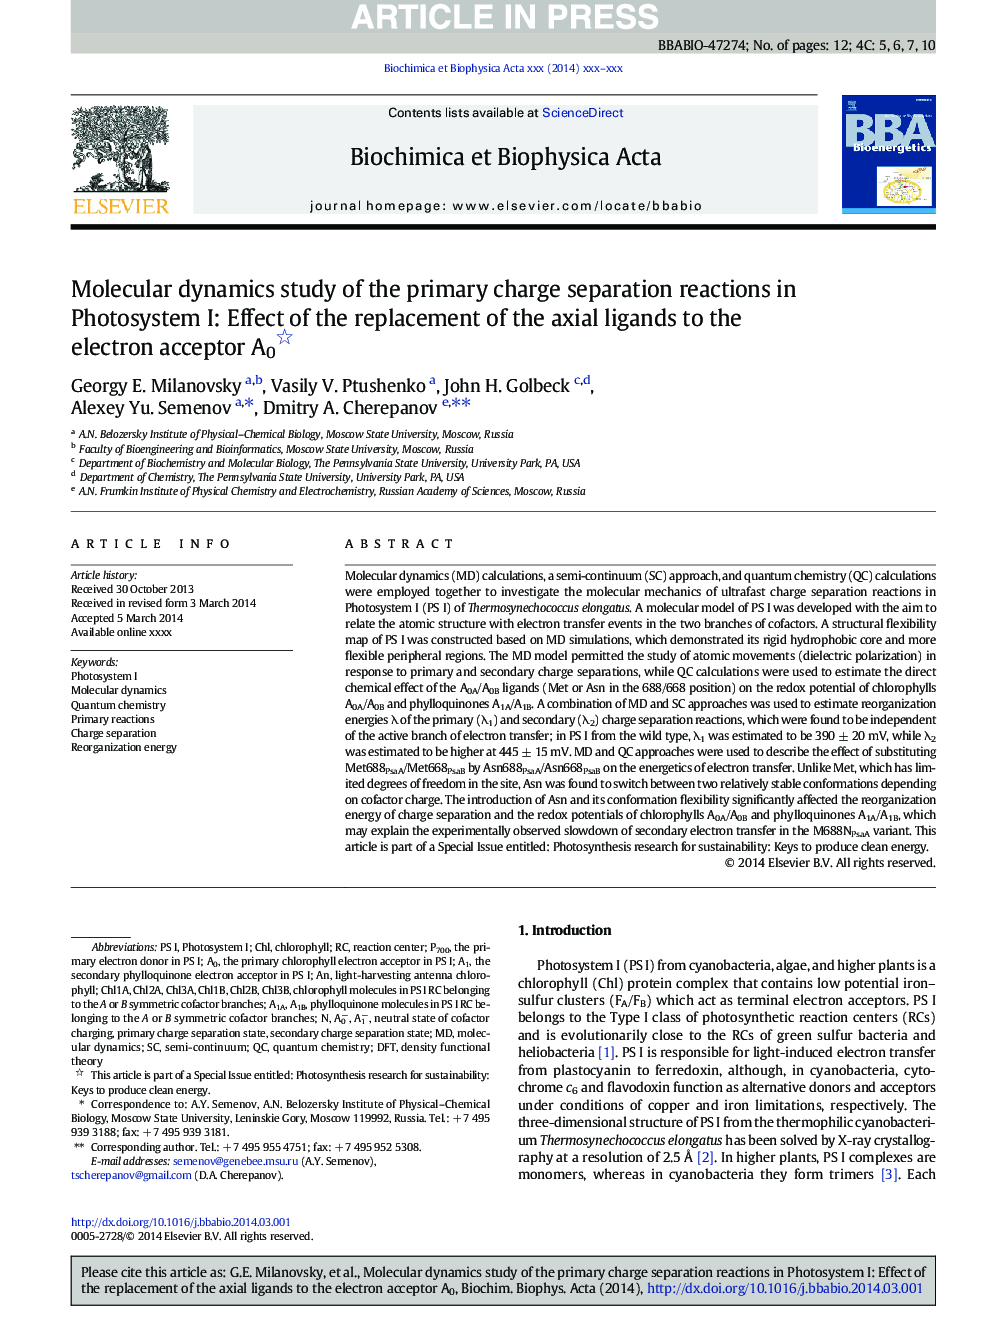 Molecular dynamics study of the primary charge separation reactions in Photosystem I: Effect of the replacement of the axial ligands to the electron acceptor A0